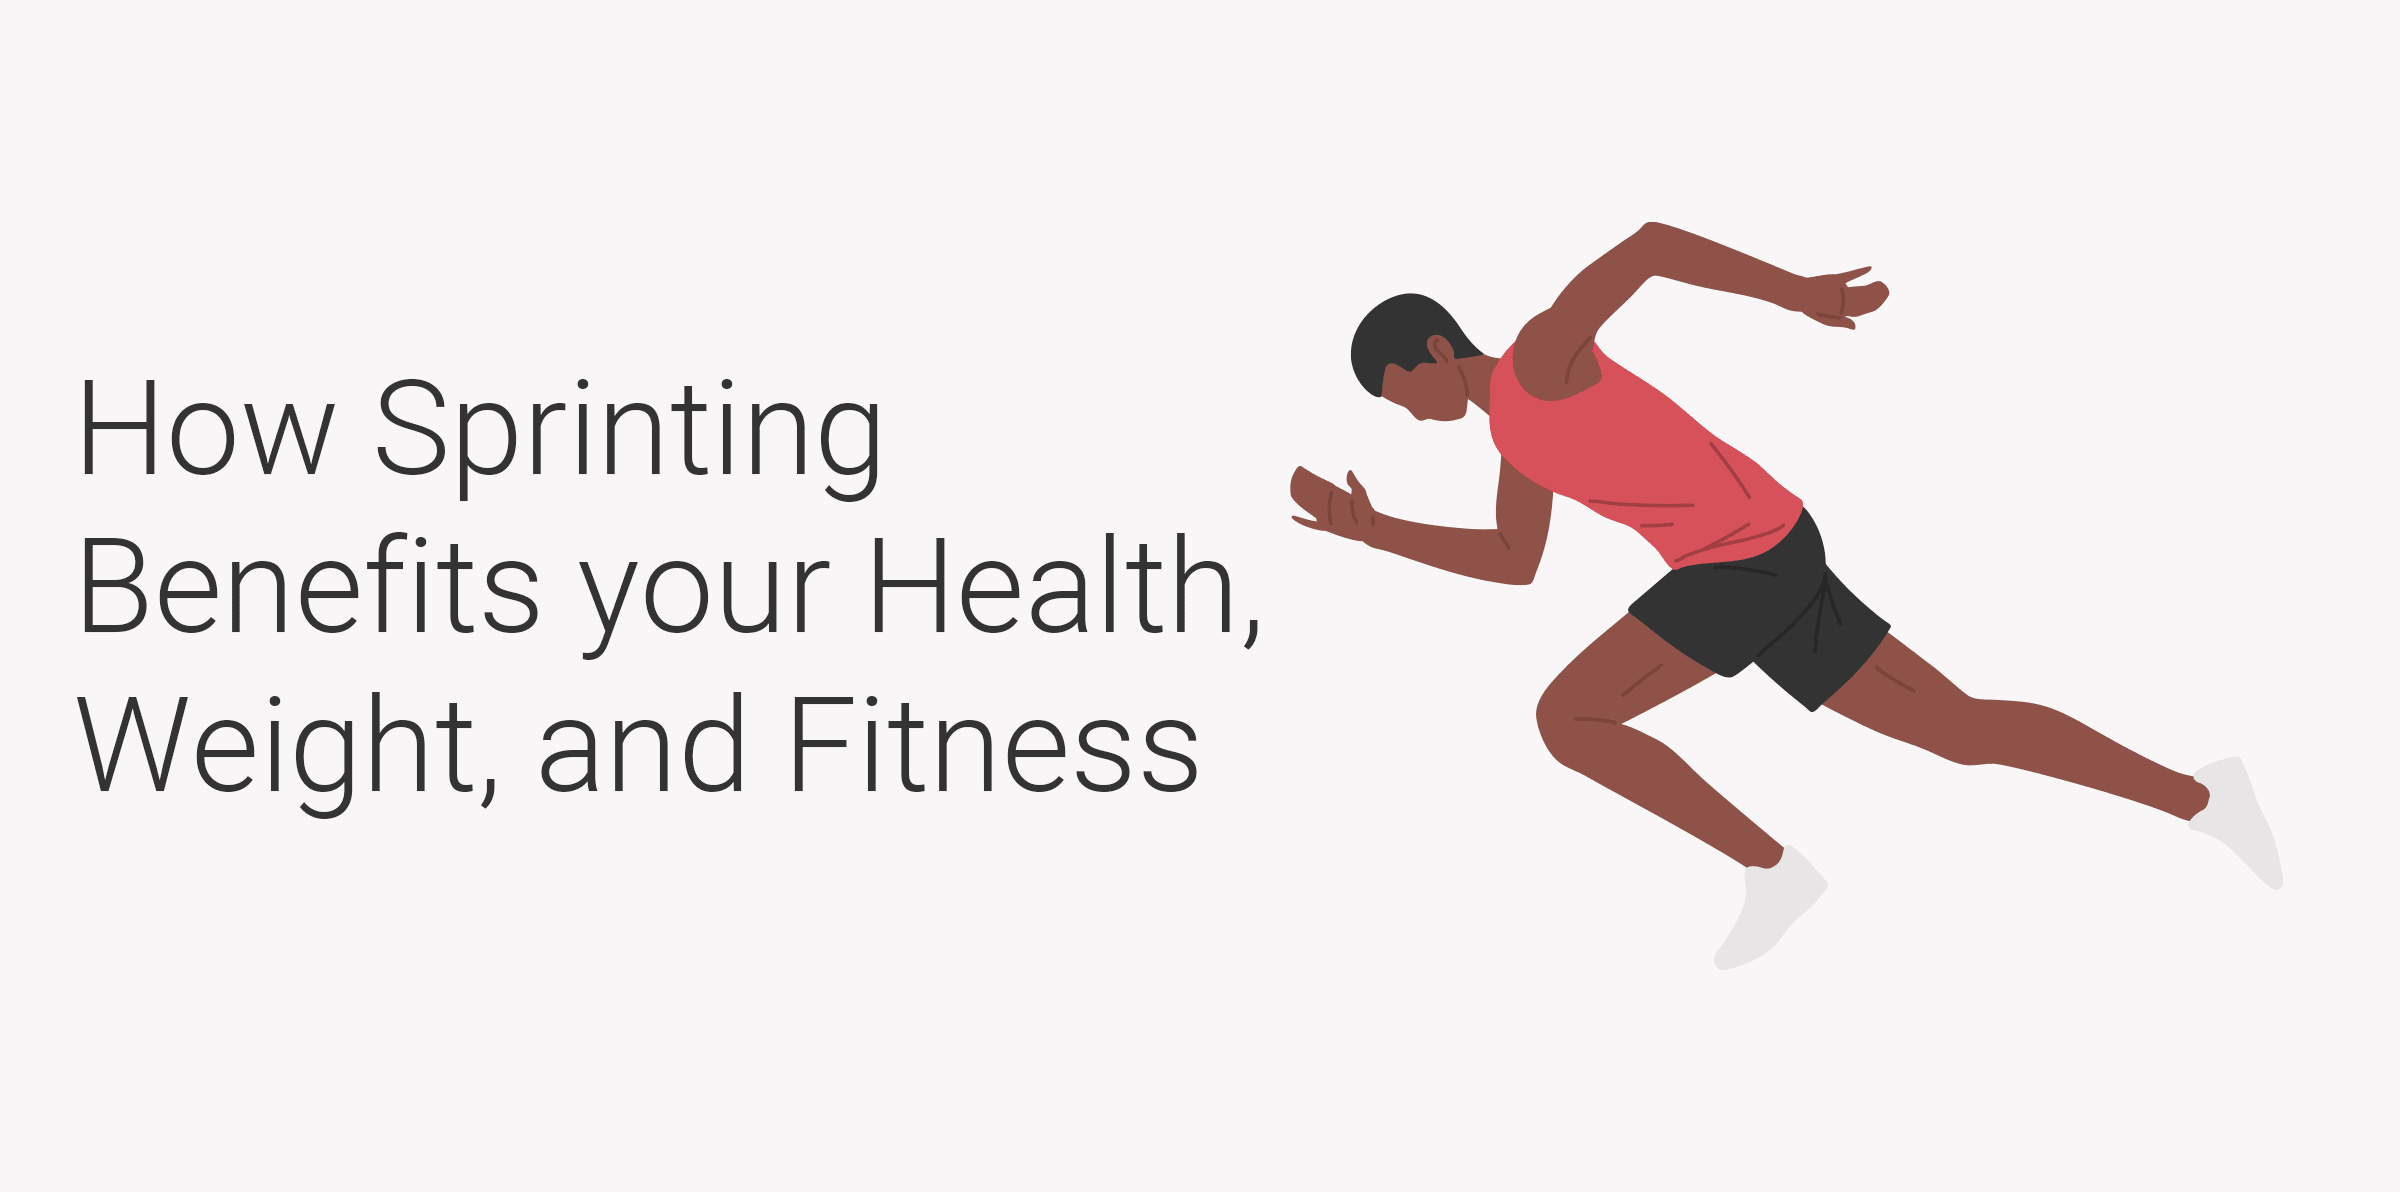 The benefit of sprinting for your health and fitness